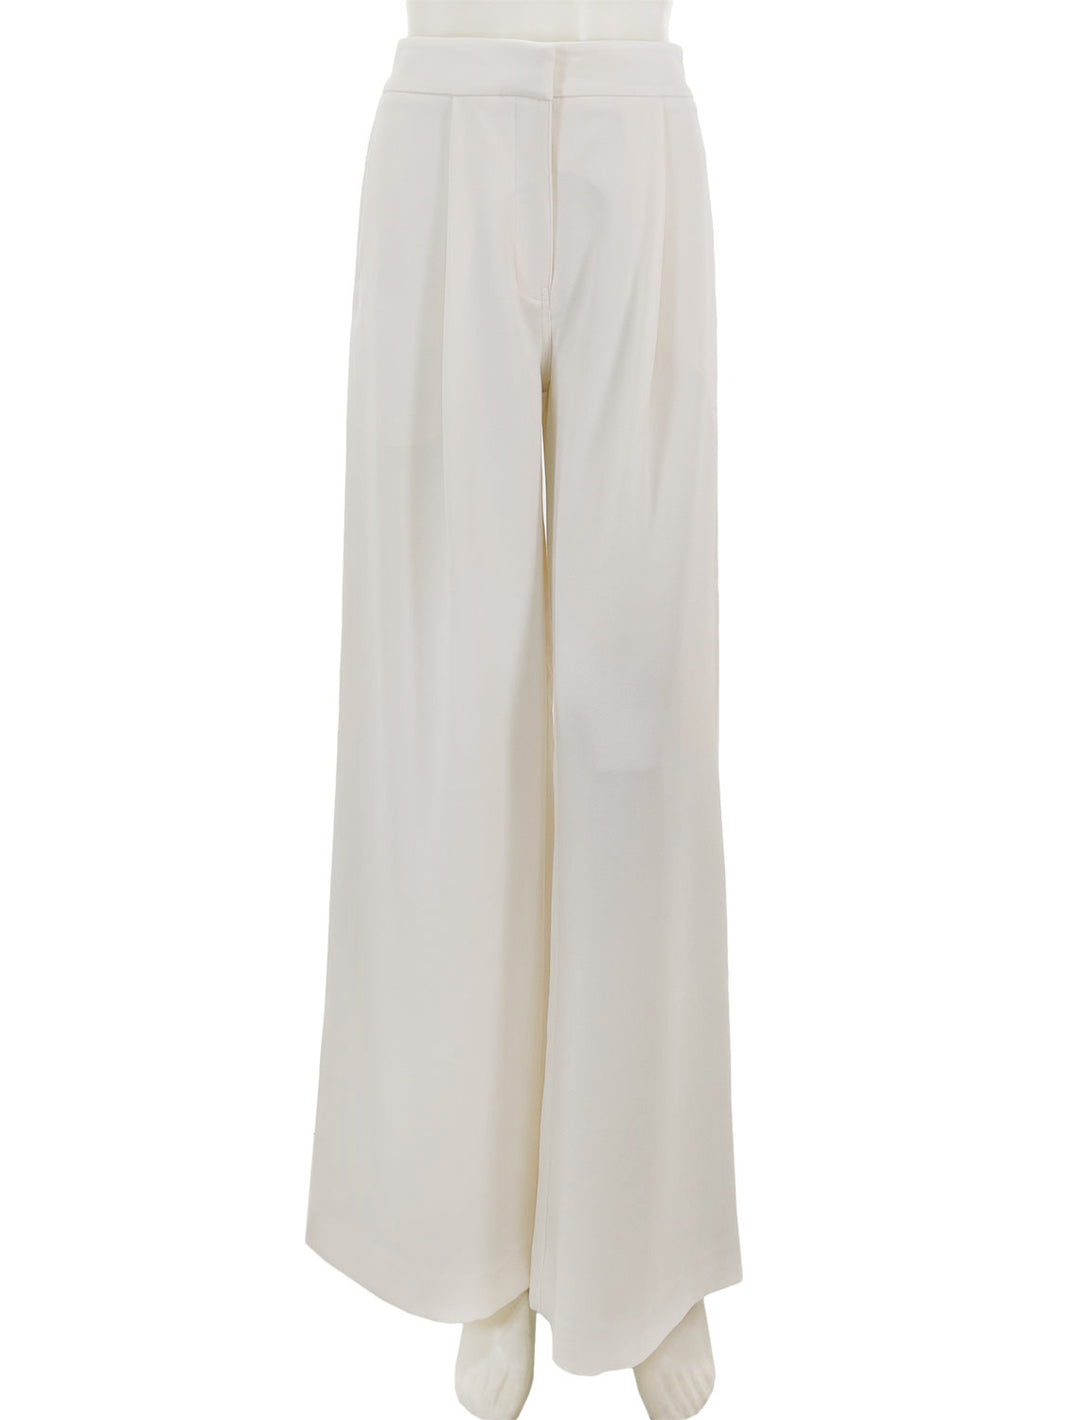 Front view of Saint Art's neve mid waisted wideleg trouser in ivory crepe.